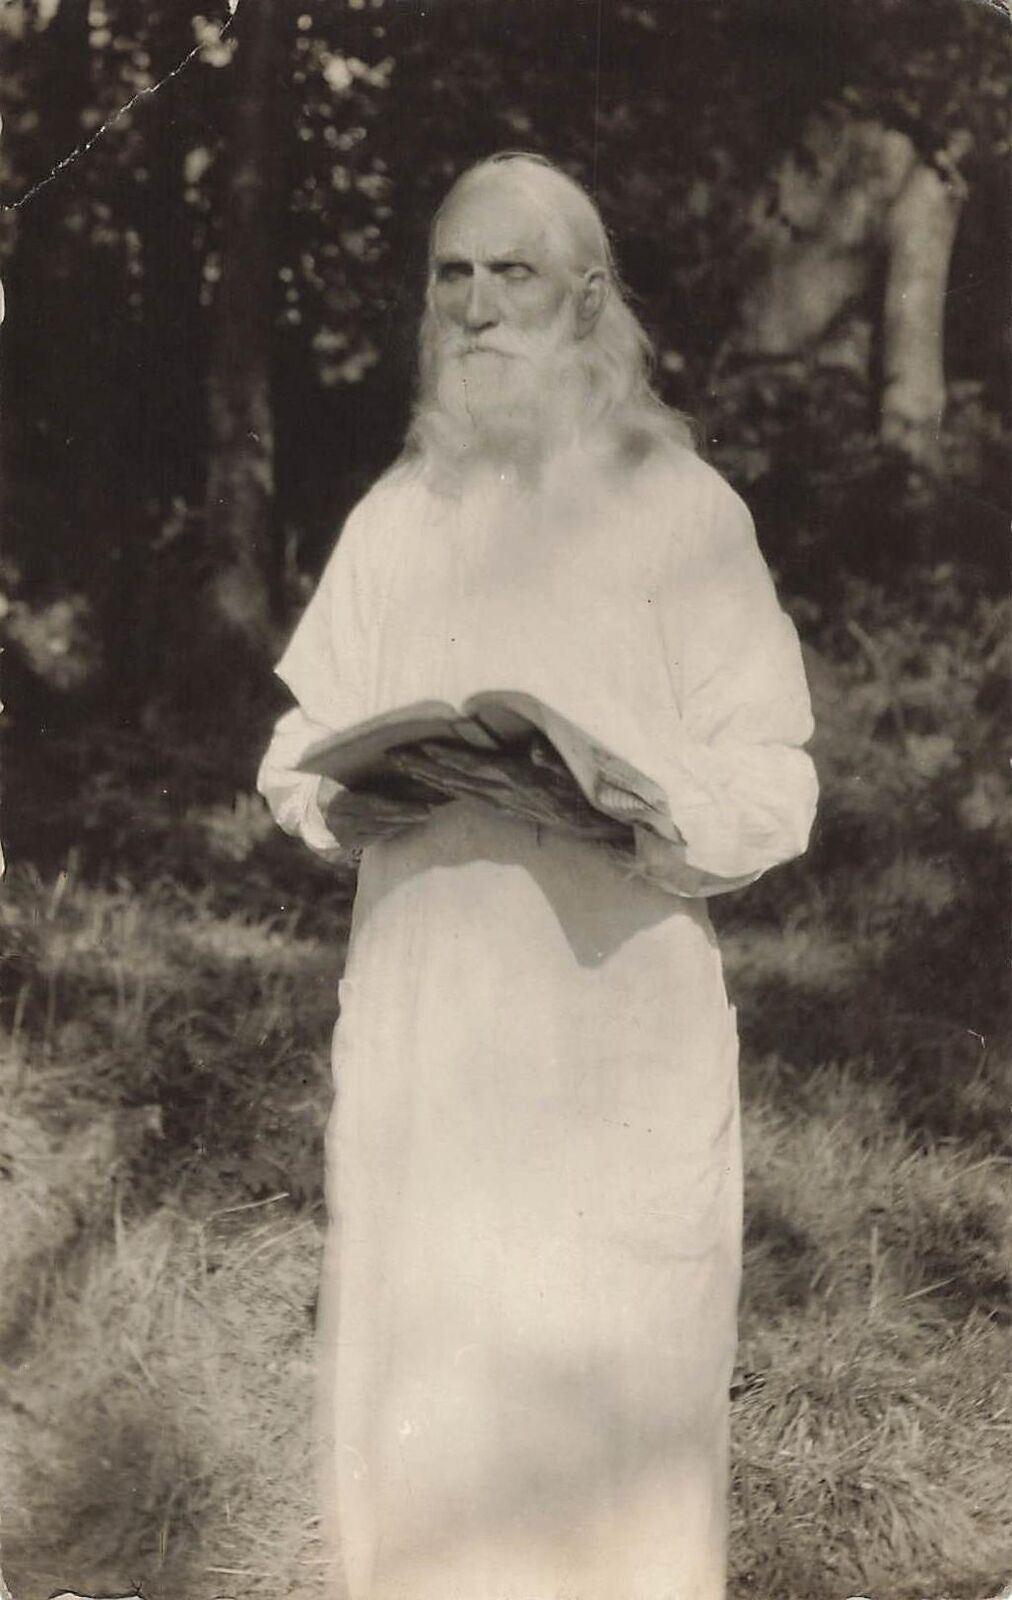 1920s RPPC Prophet CULT LEADER preacher Old Man IN WHITE Real Photo Postcard